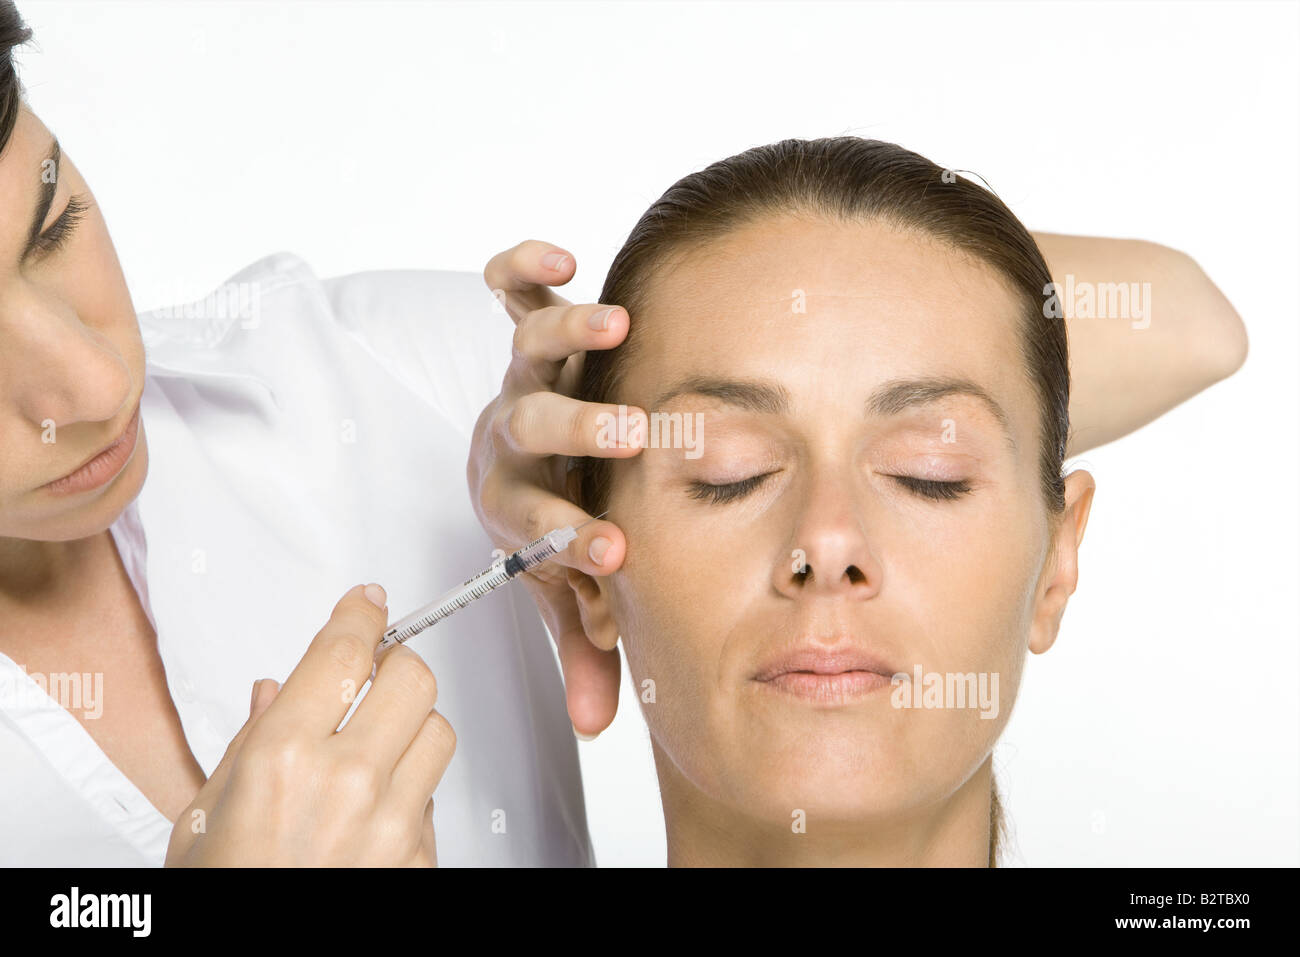 Woman receiving Botox injection, eyes closed Stock Photo